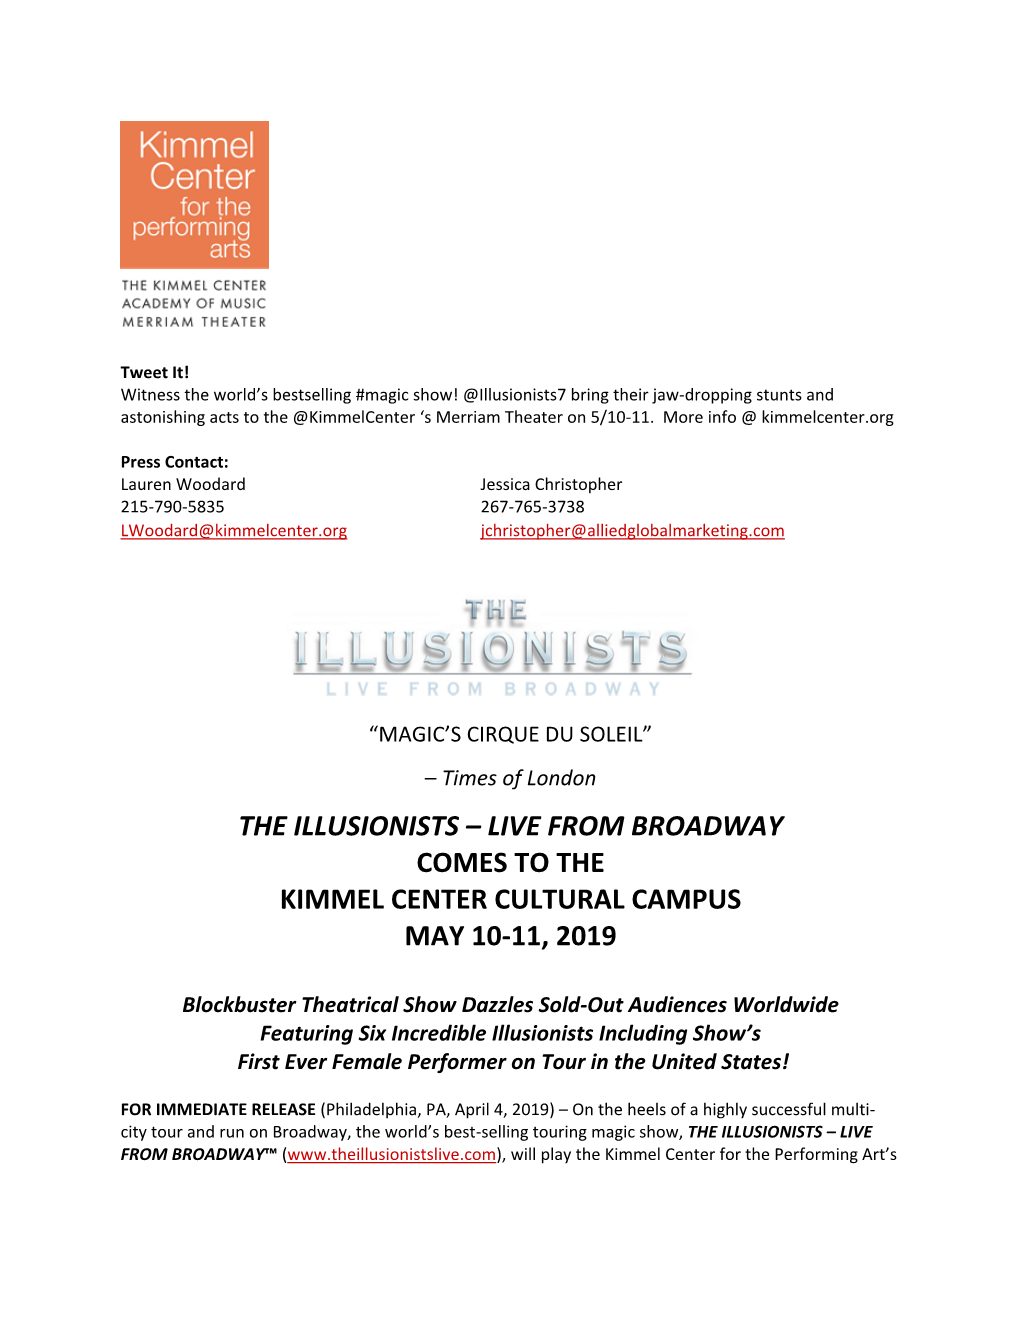 The Illusionists – Live from Broadway Comes to the Kimmel Center Cultural Campus May 10-11, 2019